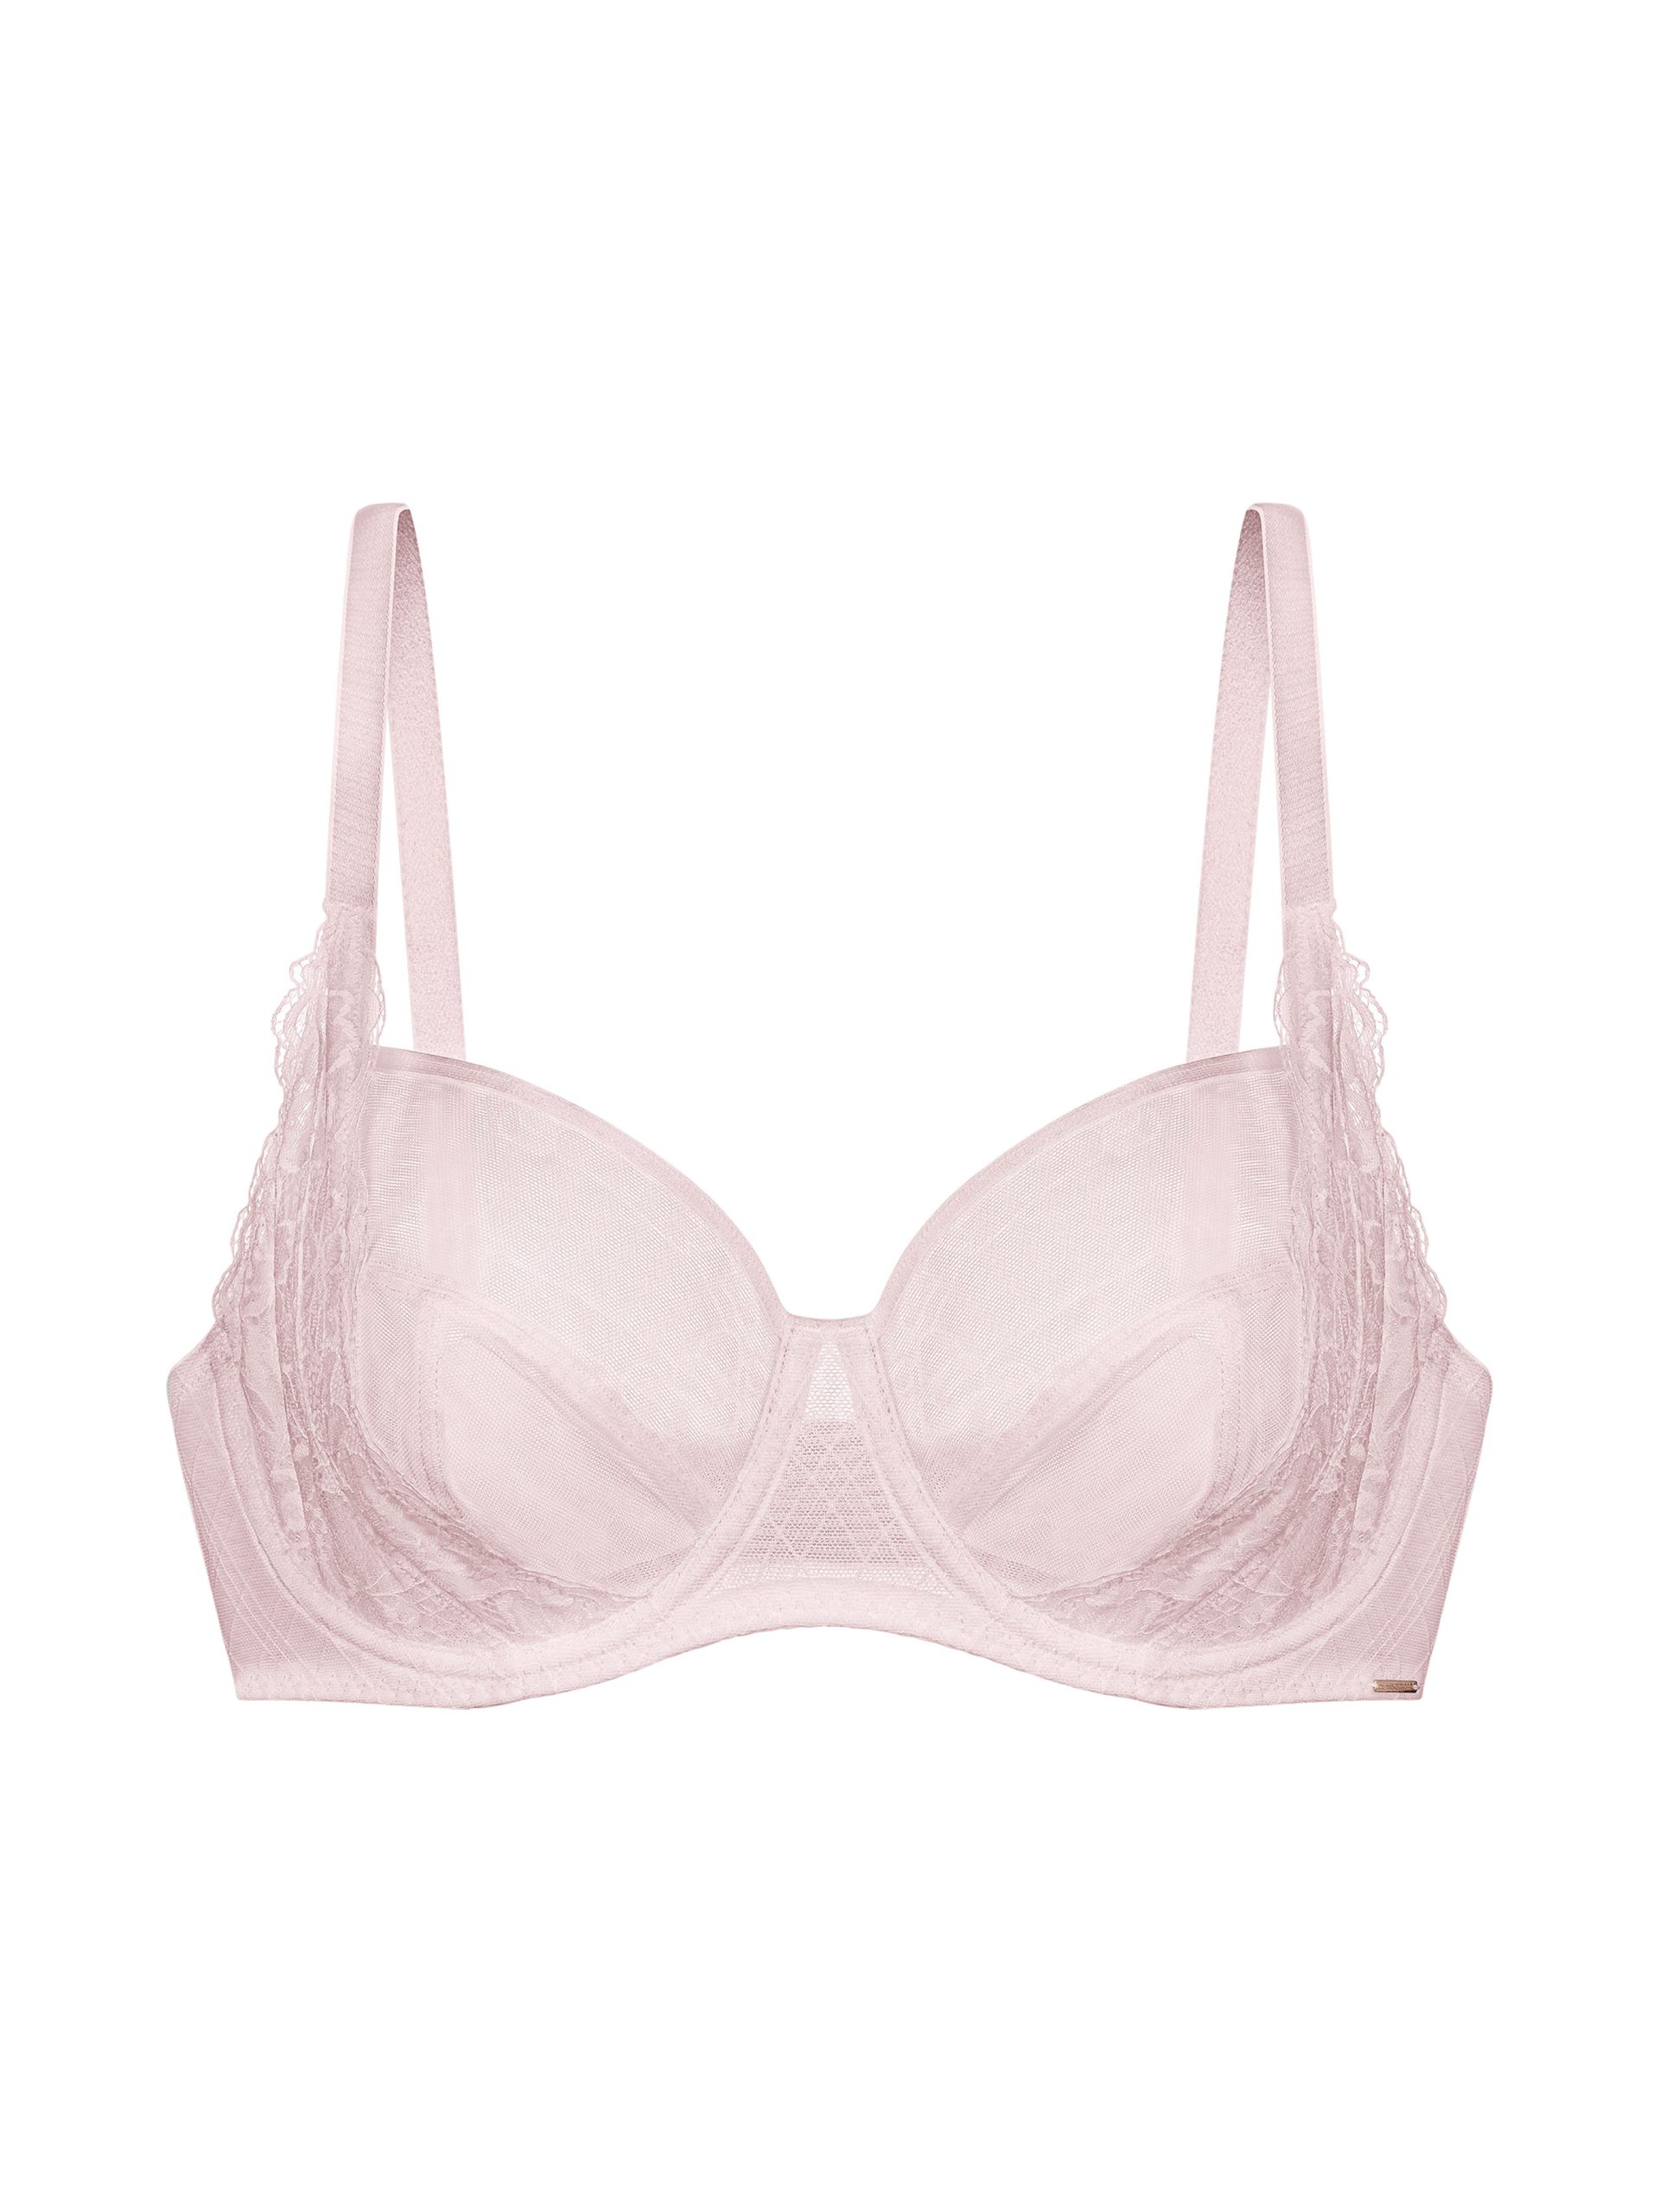 Leiora by Leiora Womens Self Design Chicken Cotton Fabric Bra - Size 36 -  Non Padded & Non Wired Full Coverage Brasier Available in Skin Color Women  Full Coverage Non Padded Bra 